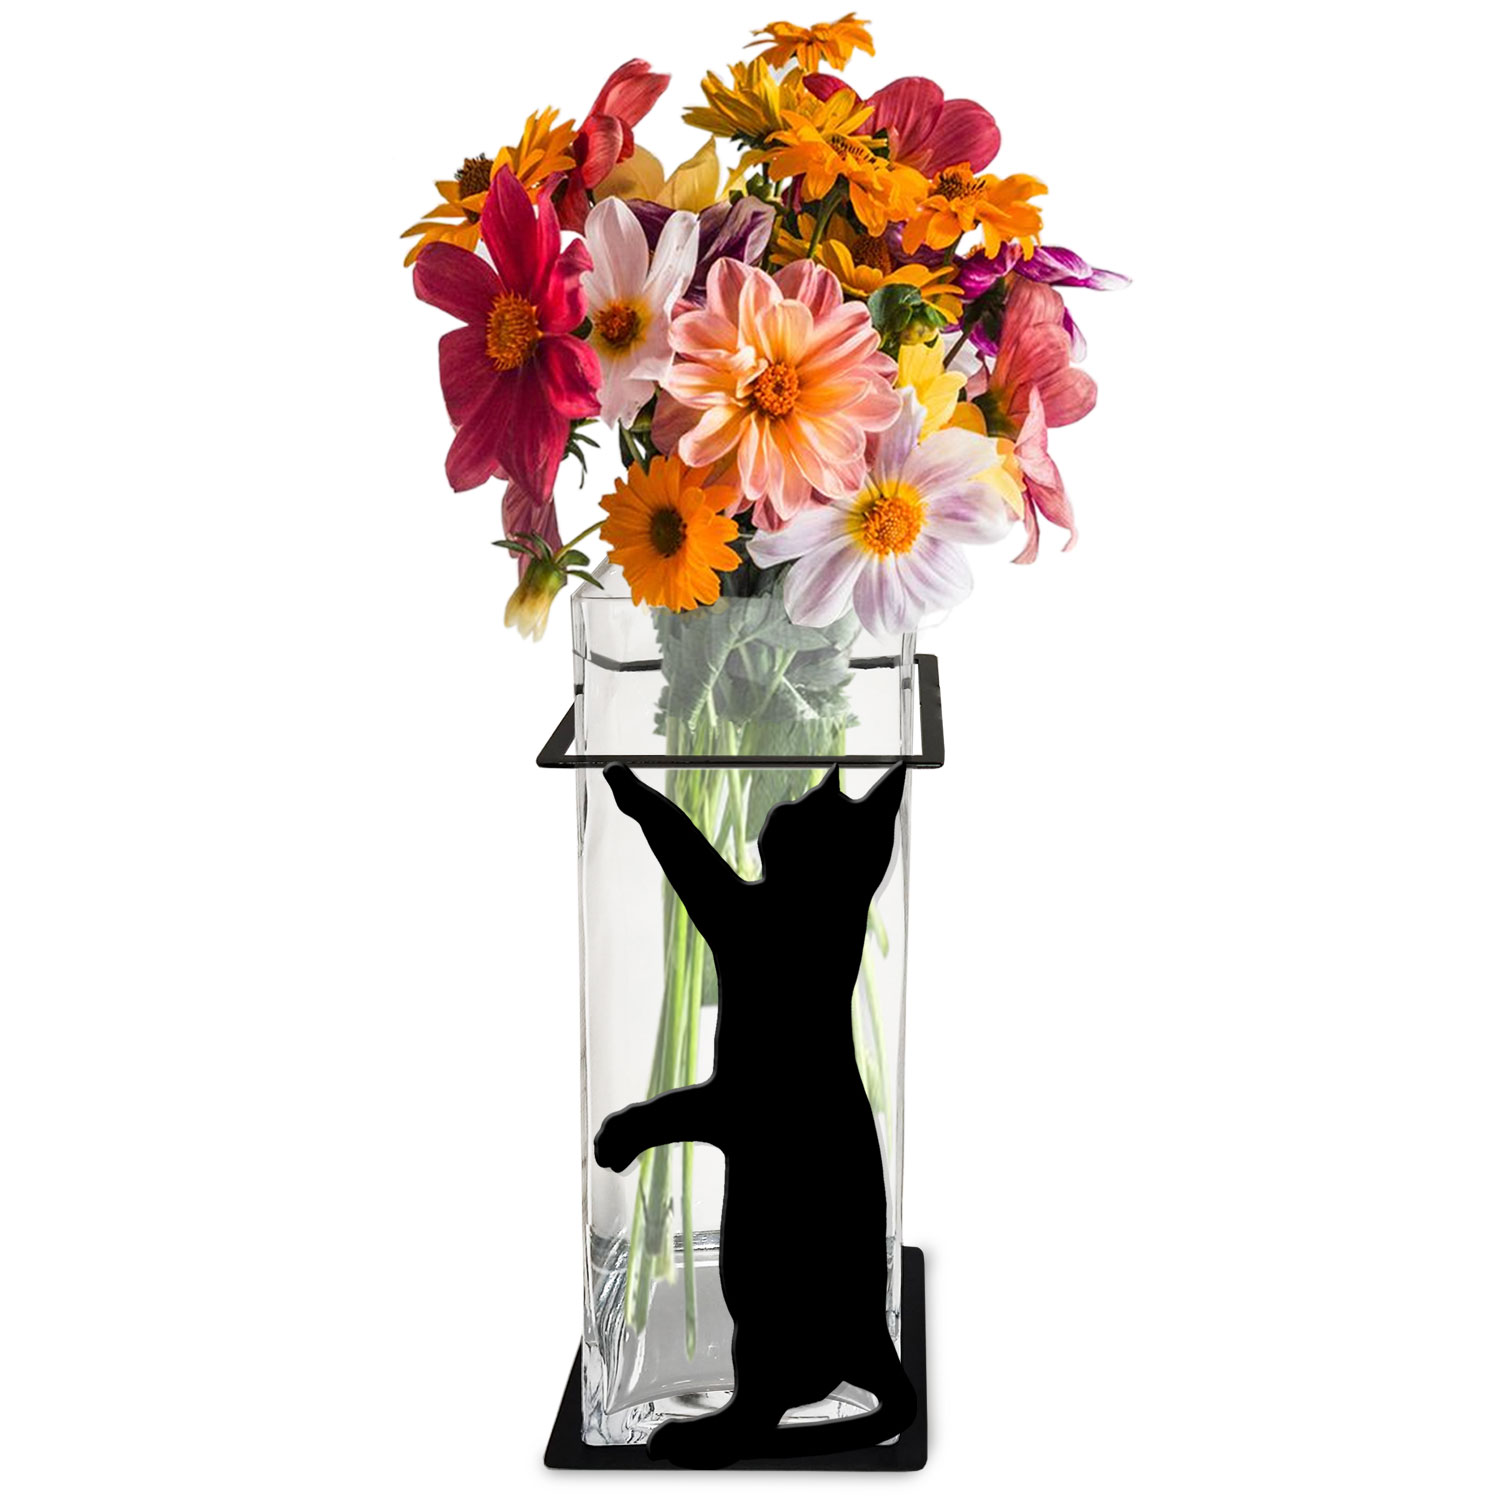 621502 - Reaching Cat 12in Tall Metal and Glass Square Vase